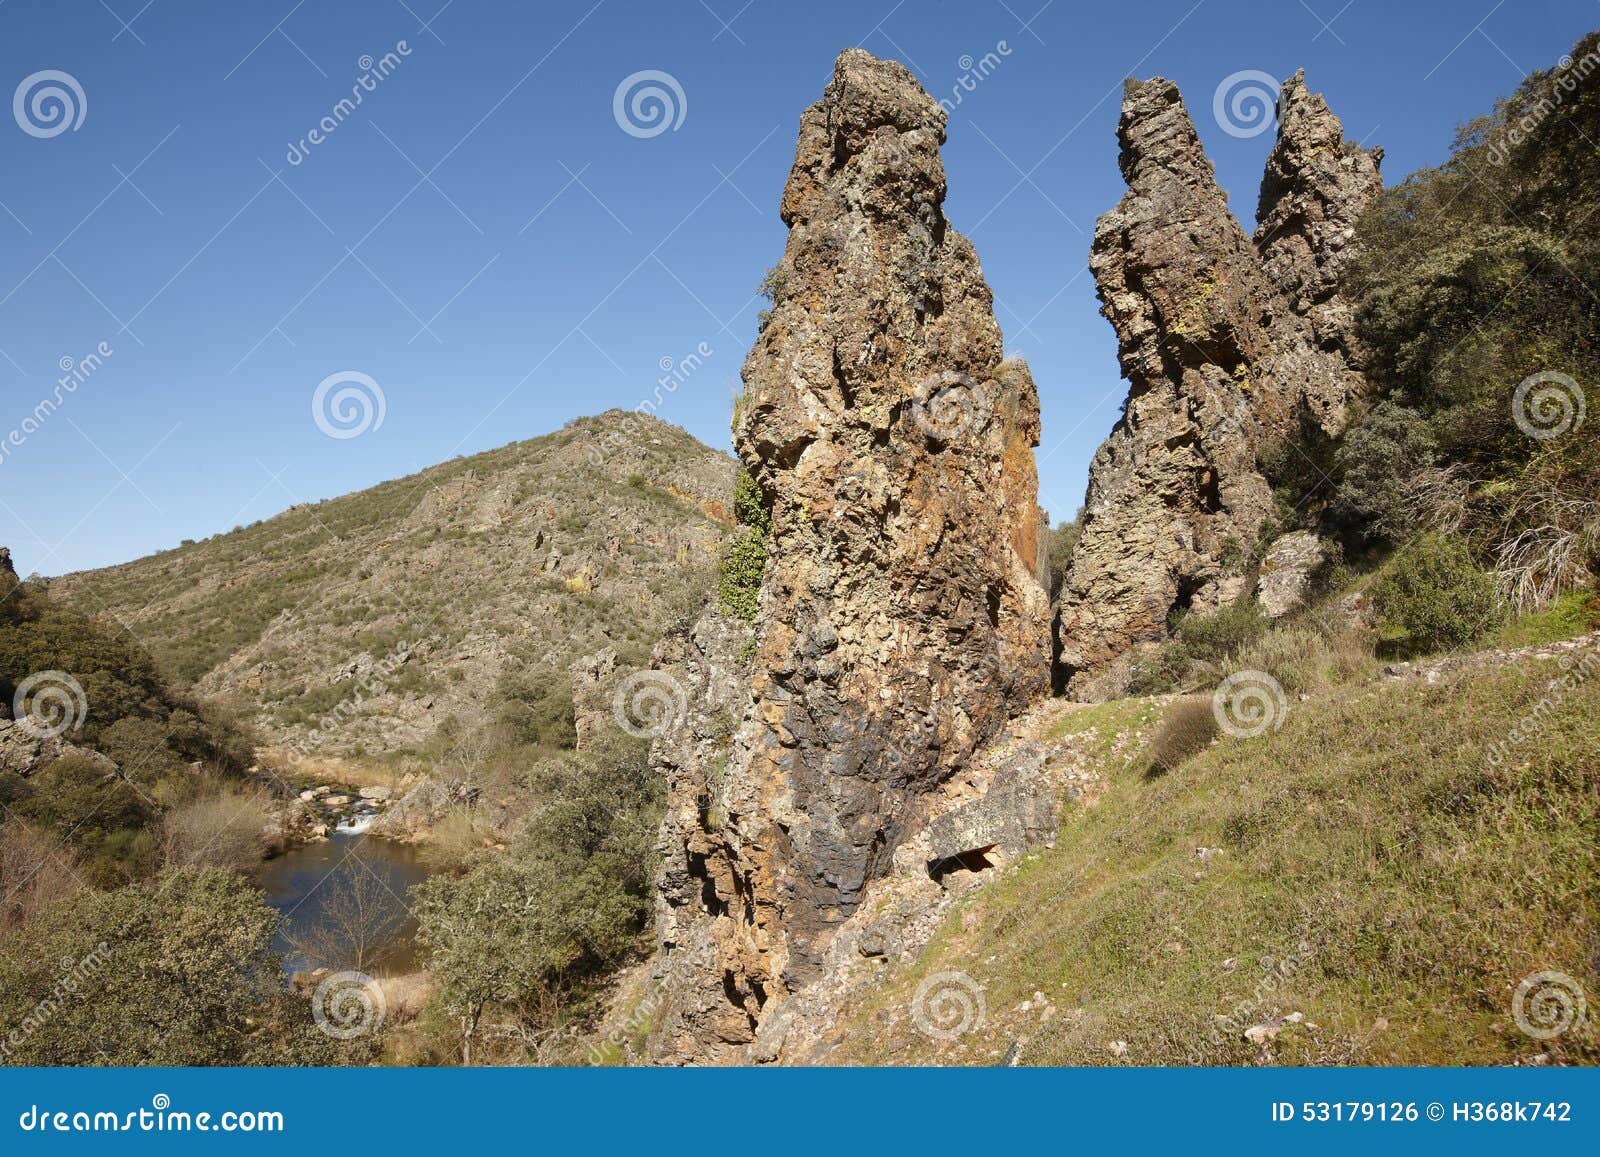 rocky pinnacles and stream in boqueron route. cabaneros, spain